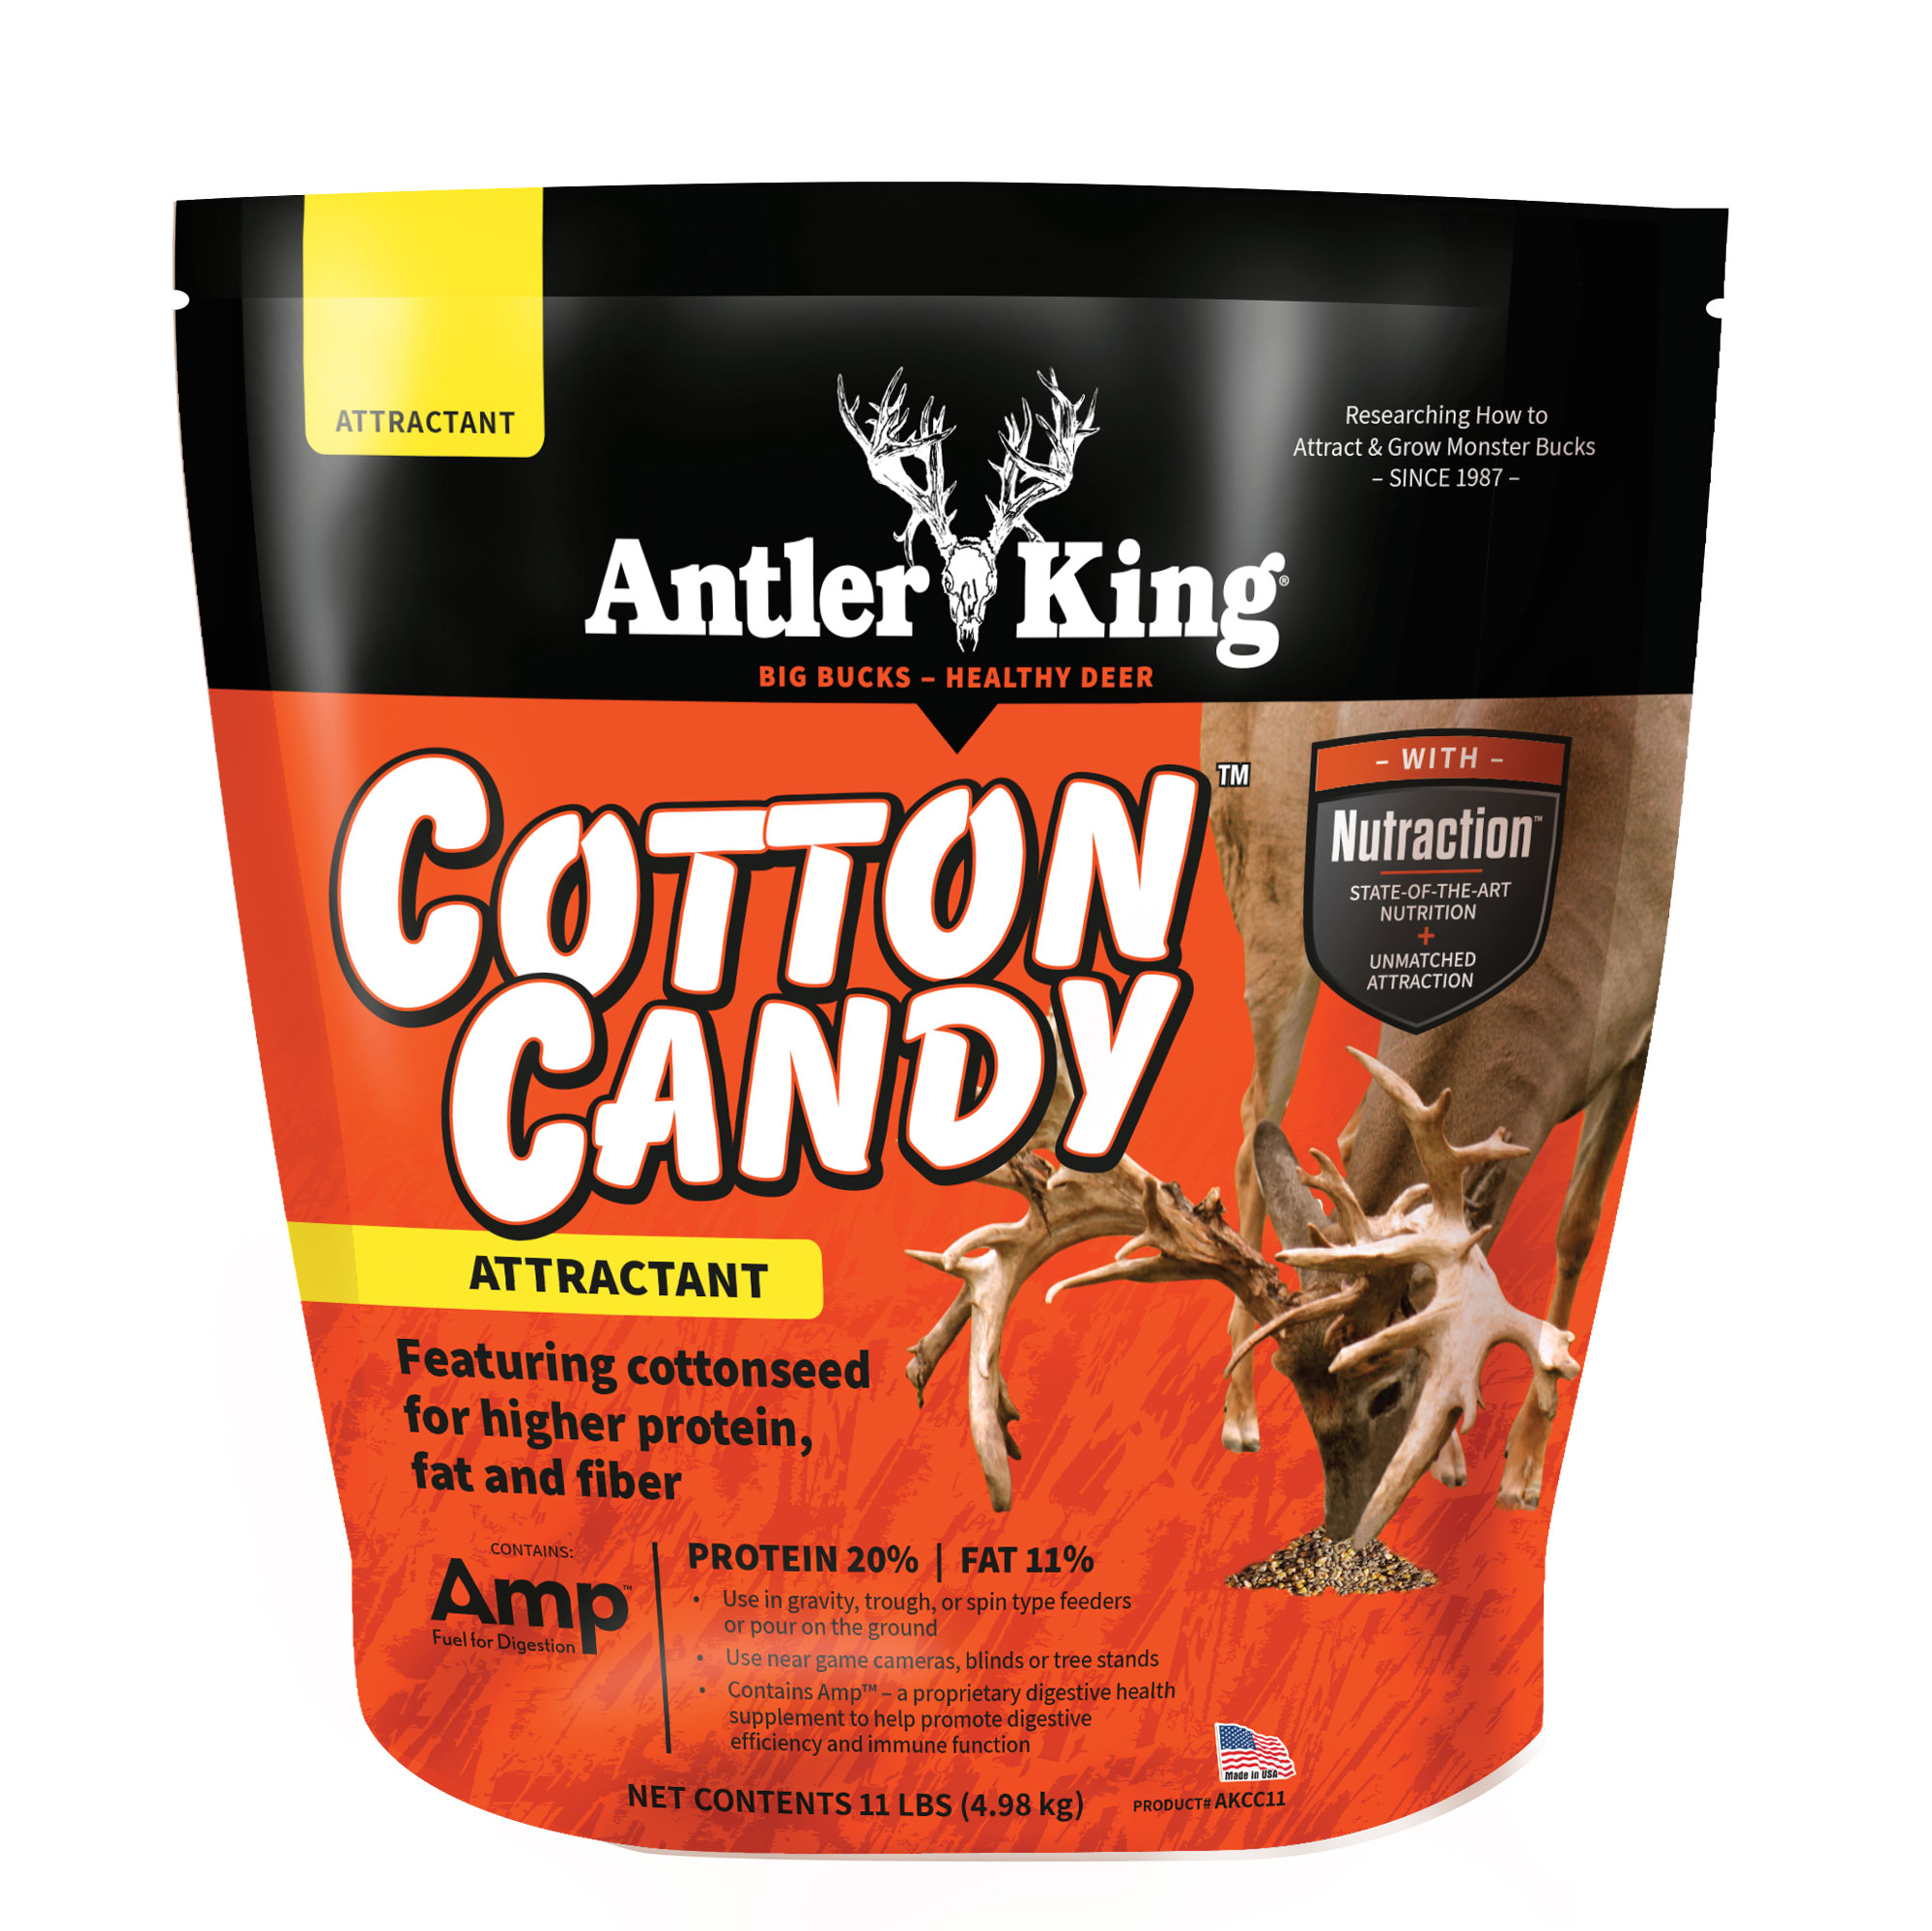 Cottonseed for Deer  Feeding Cottonseed to Whitetail Deer